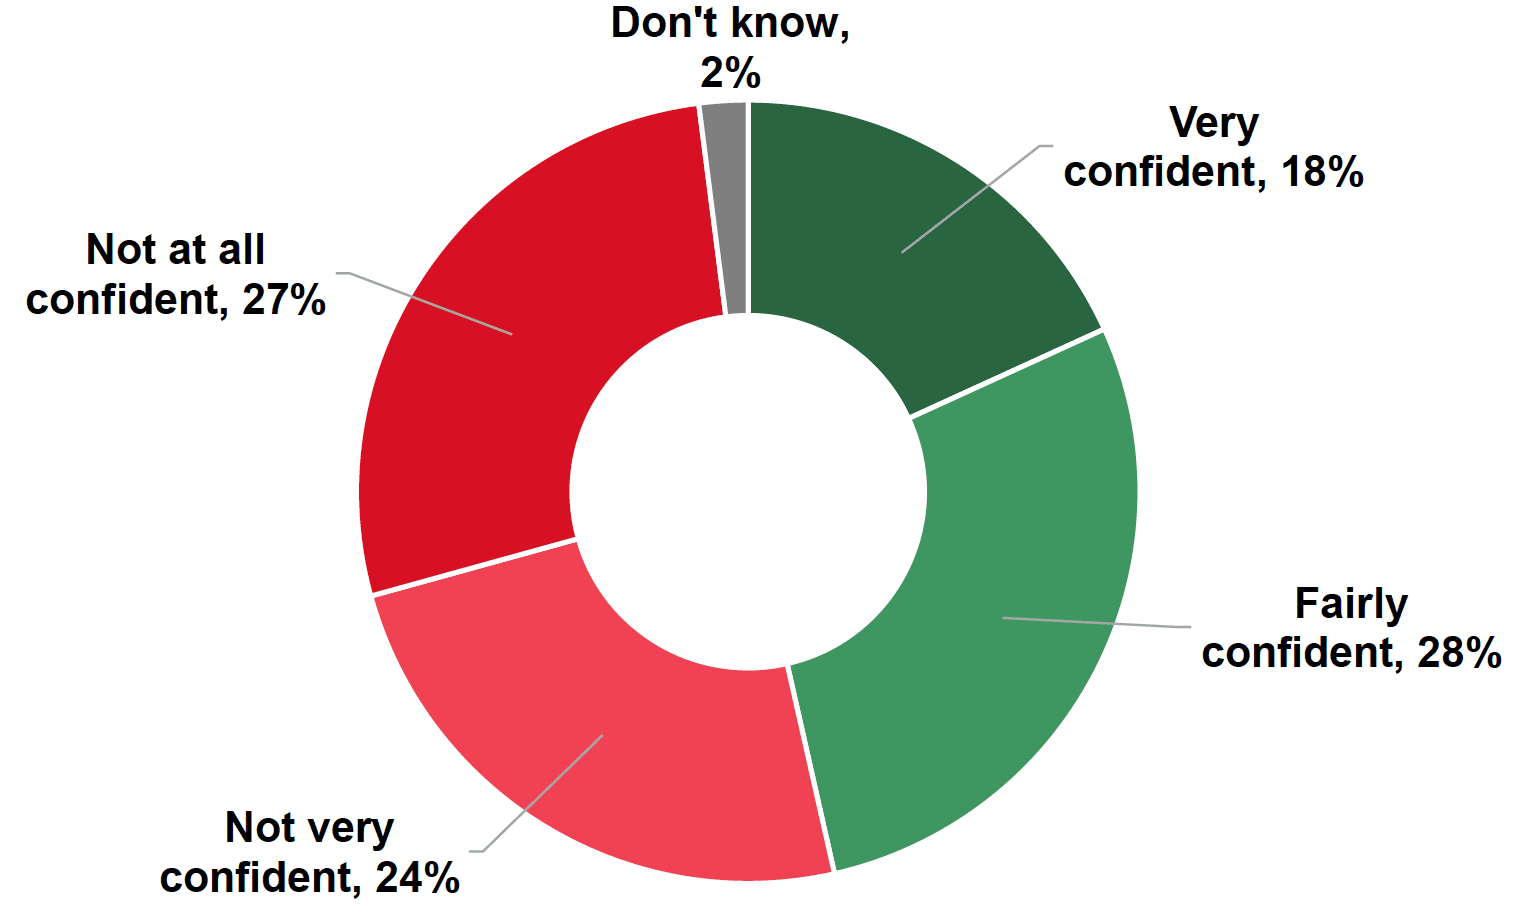 Pie chart showing that 51% were not confident they could get a GP appointment in a reasonable time, with 47% confident